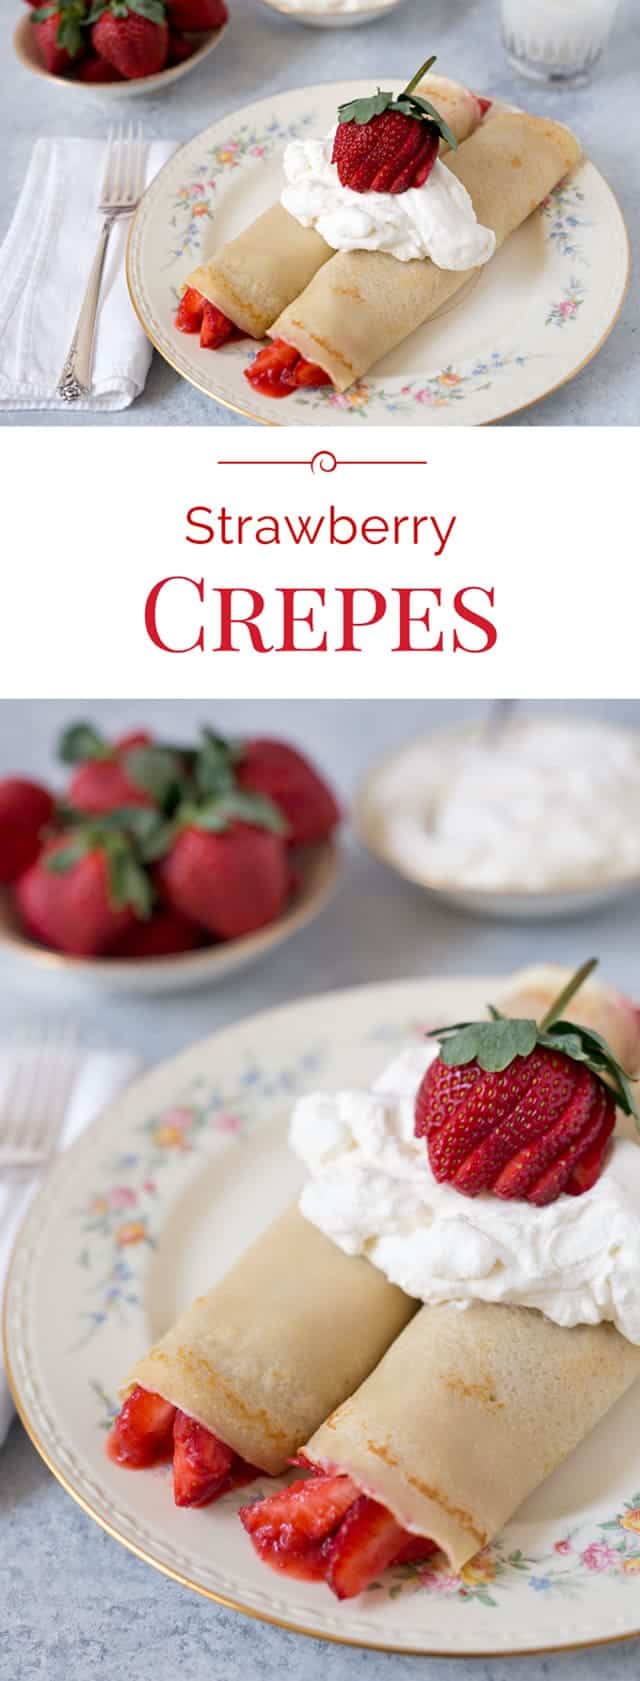 Strawberry-Crepes-Collage